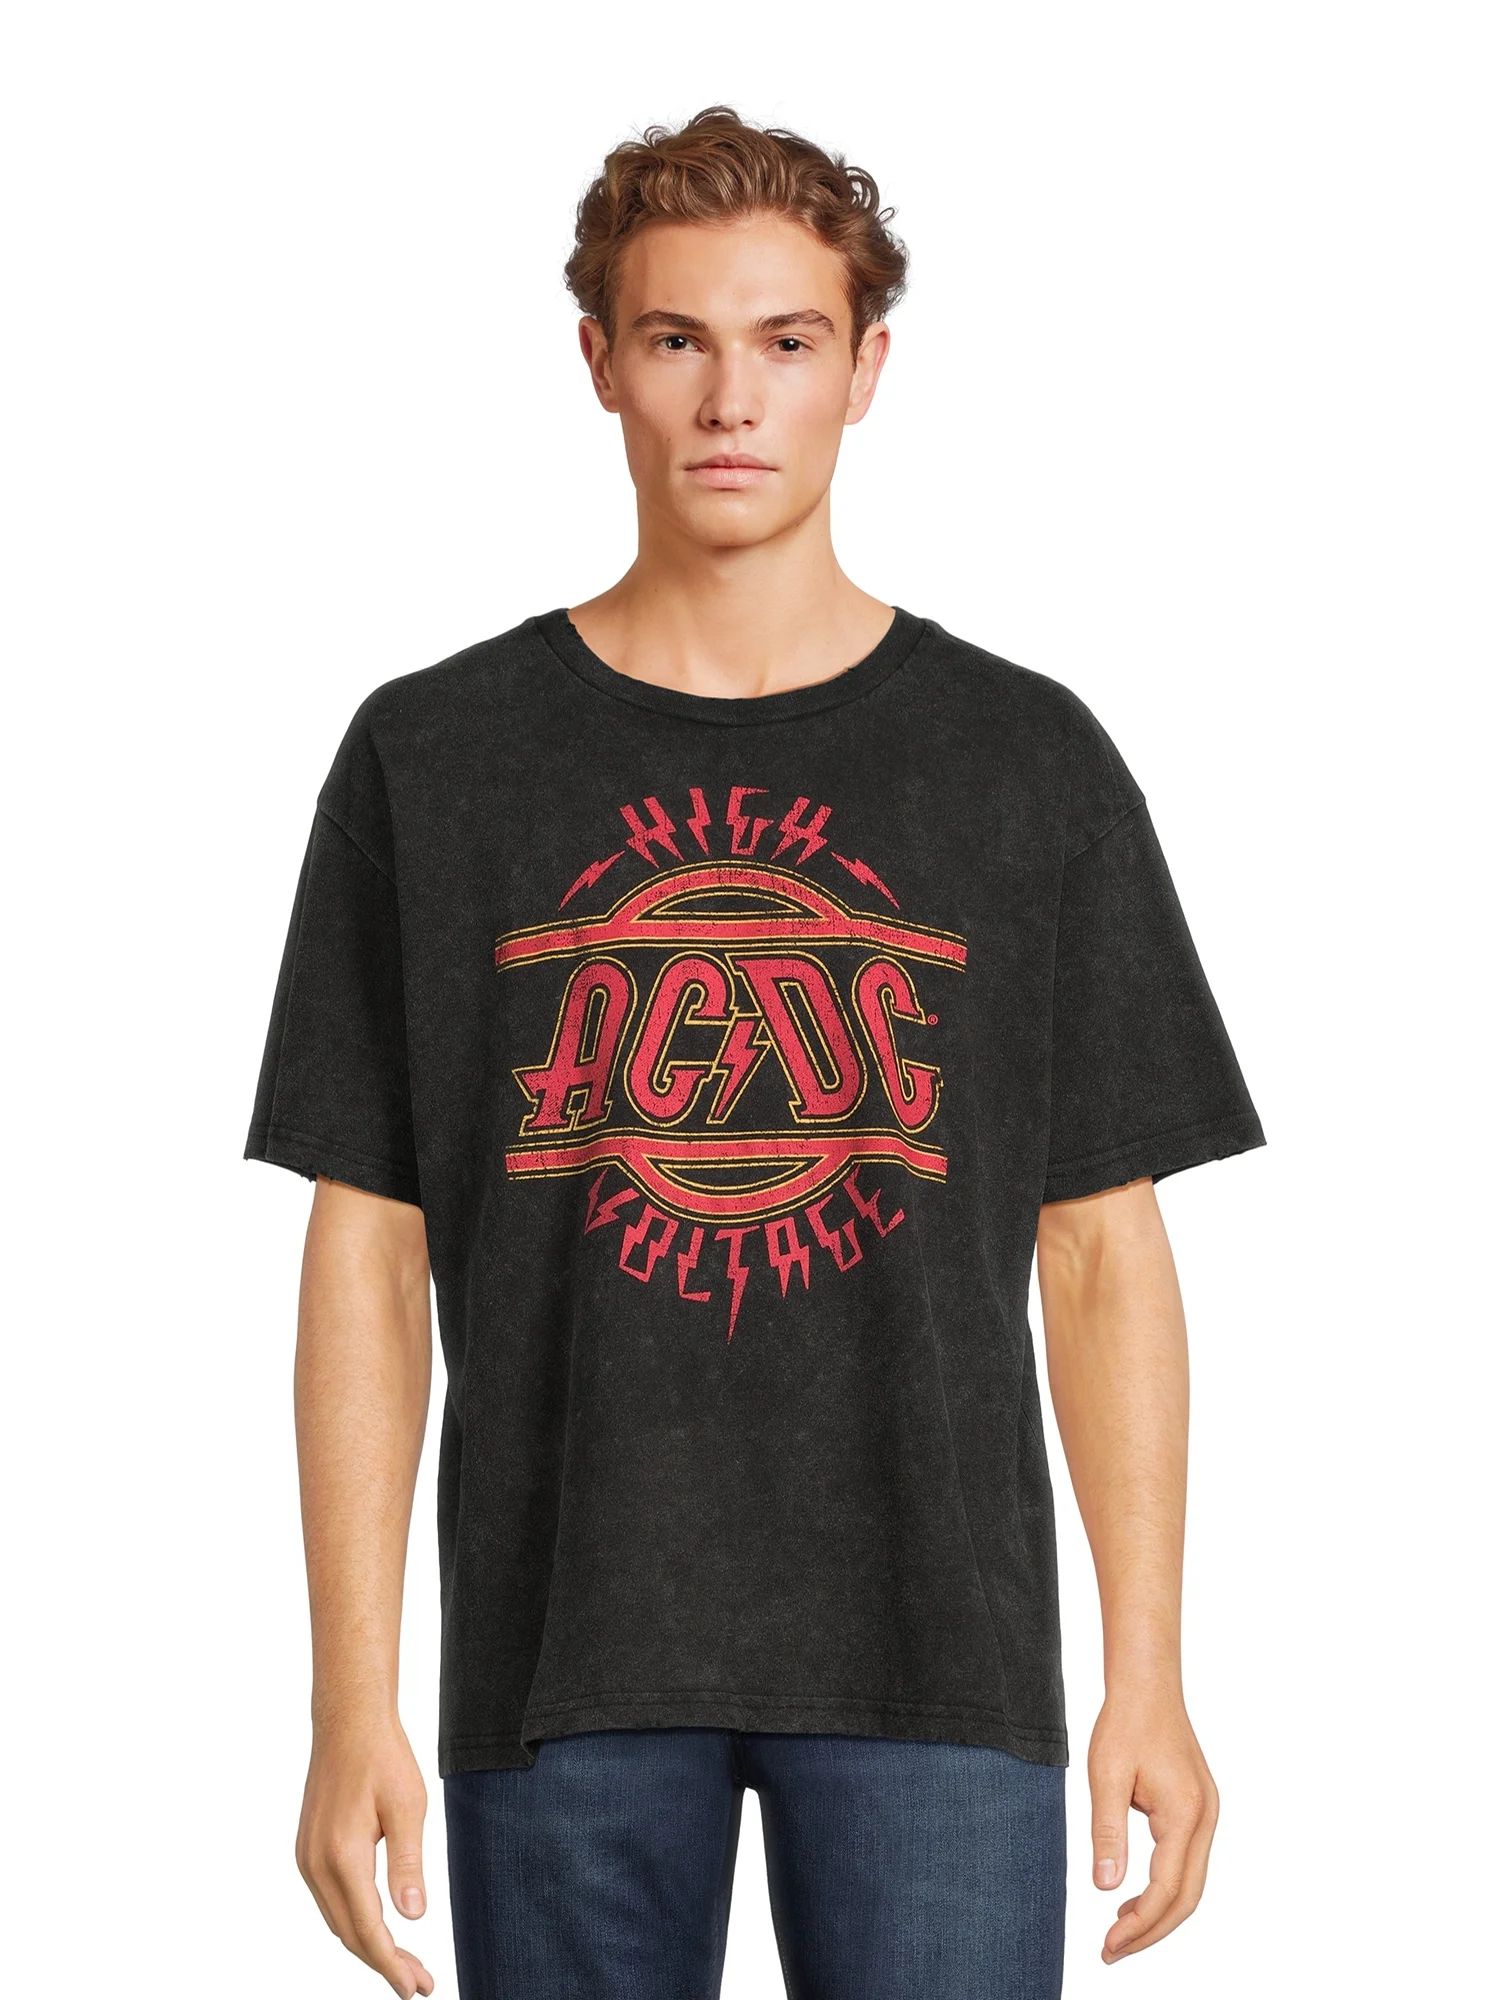 ACDC Men’s and Big Men’s Oversized Graphic Band Tee, Sizes XS-3XL | Walmart (US)